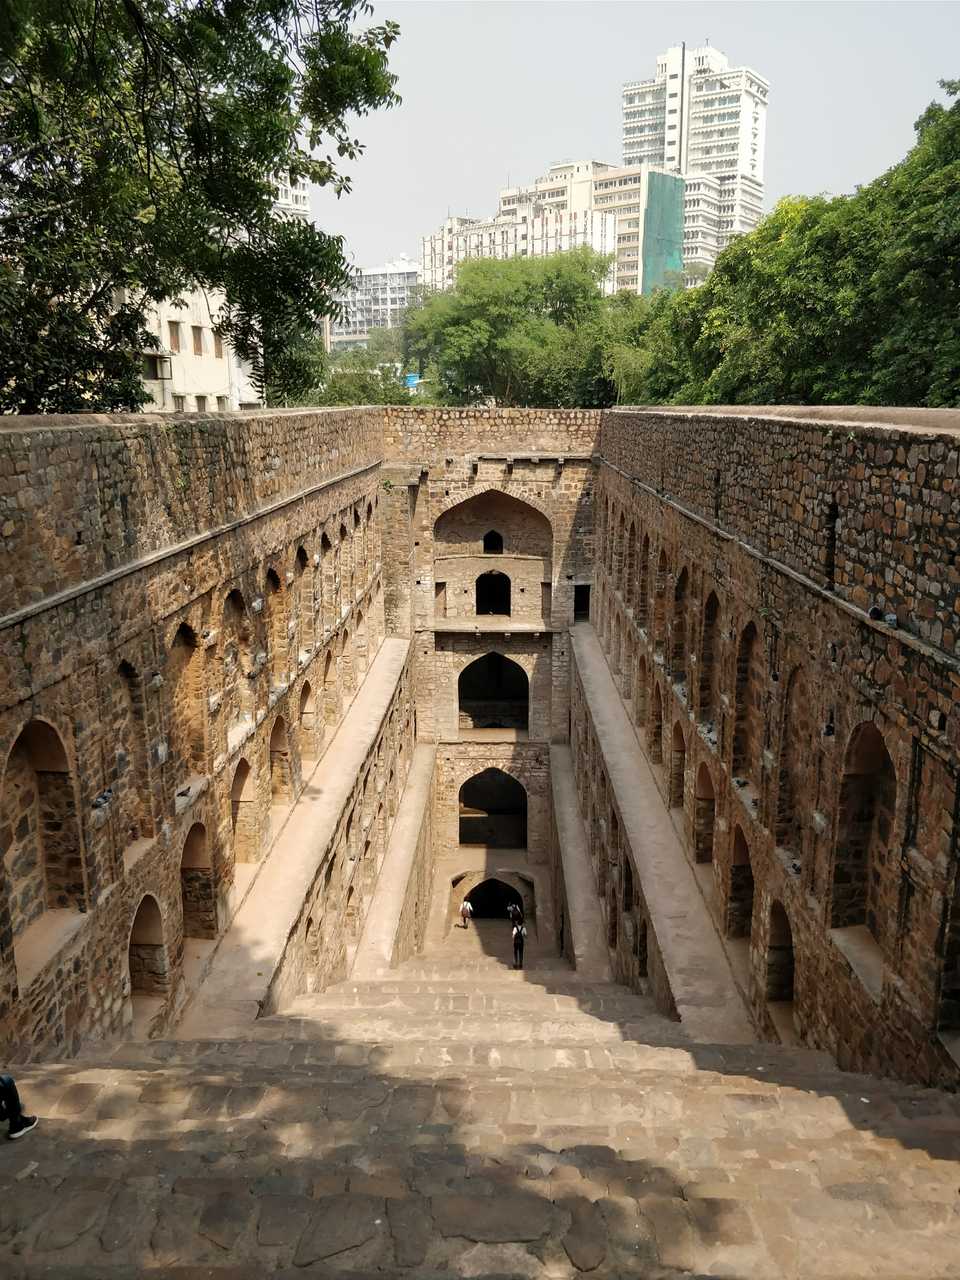 Agrasen Ki Baoli from the top of the stairs